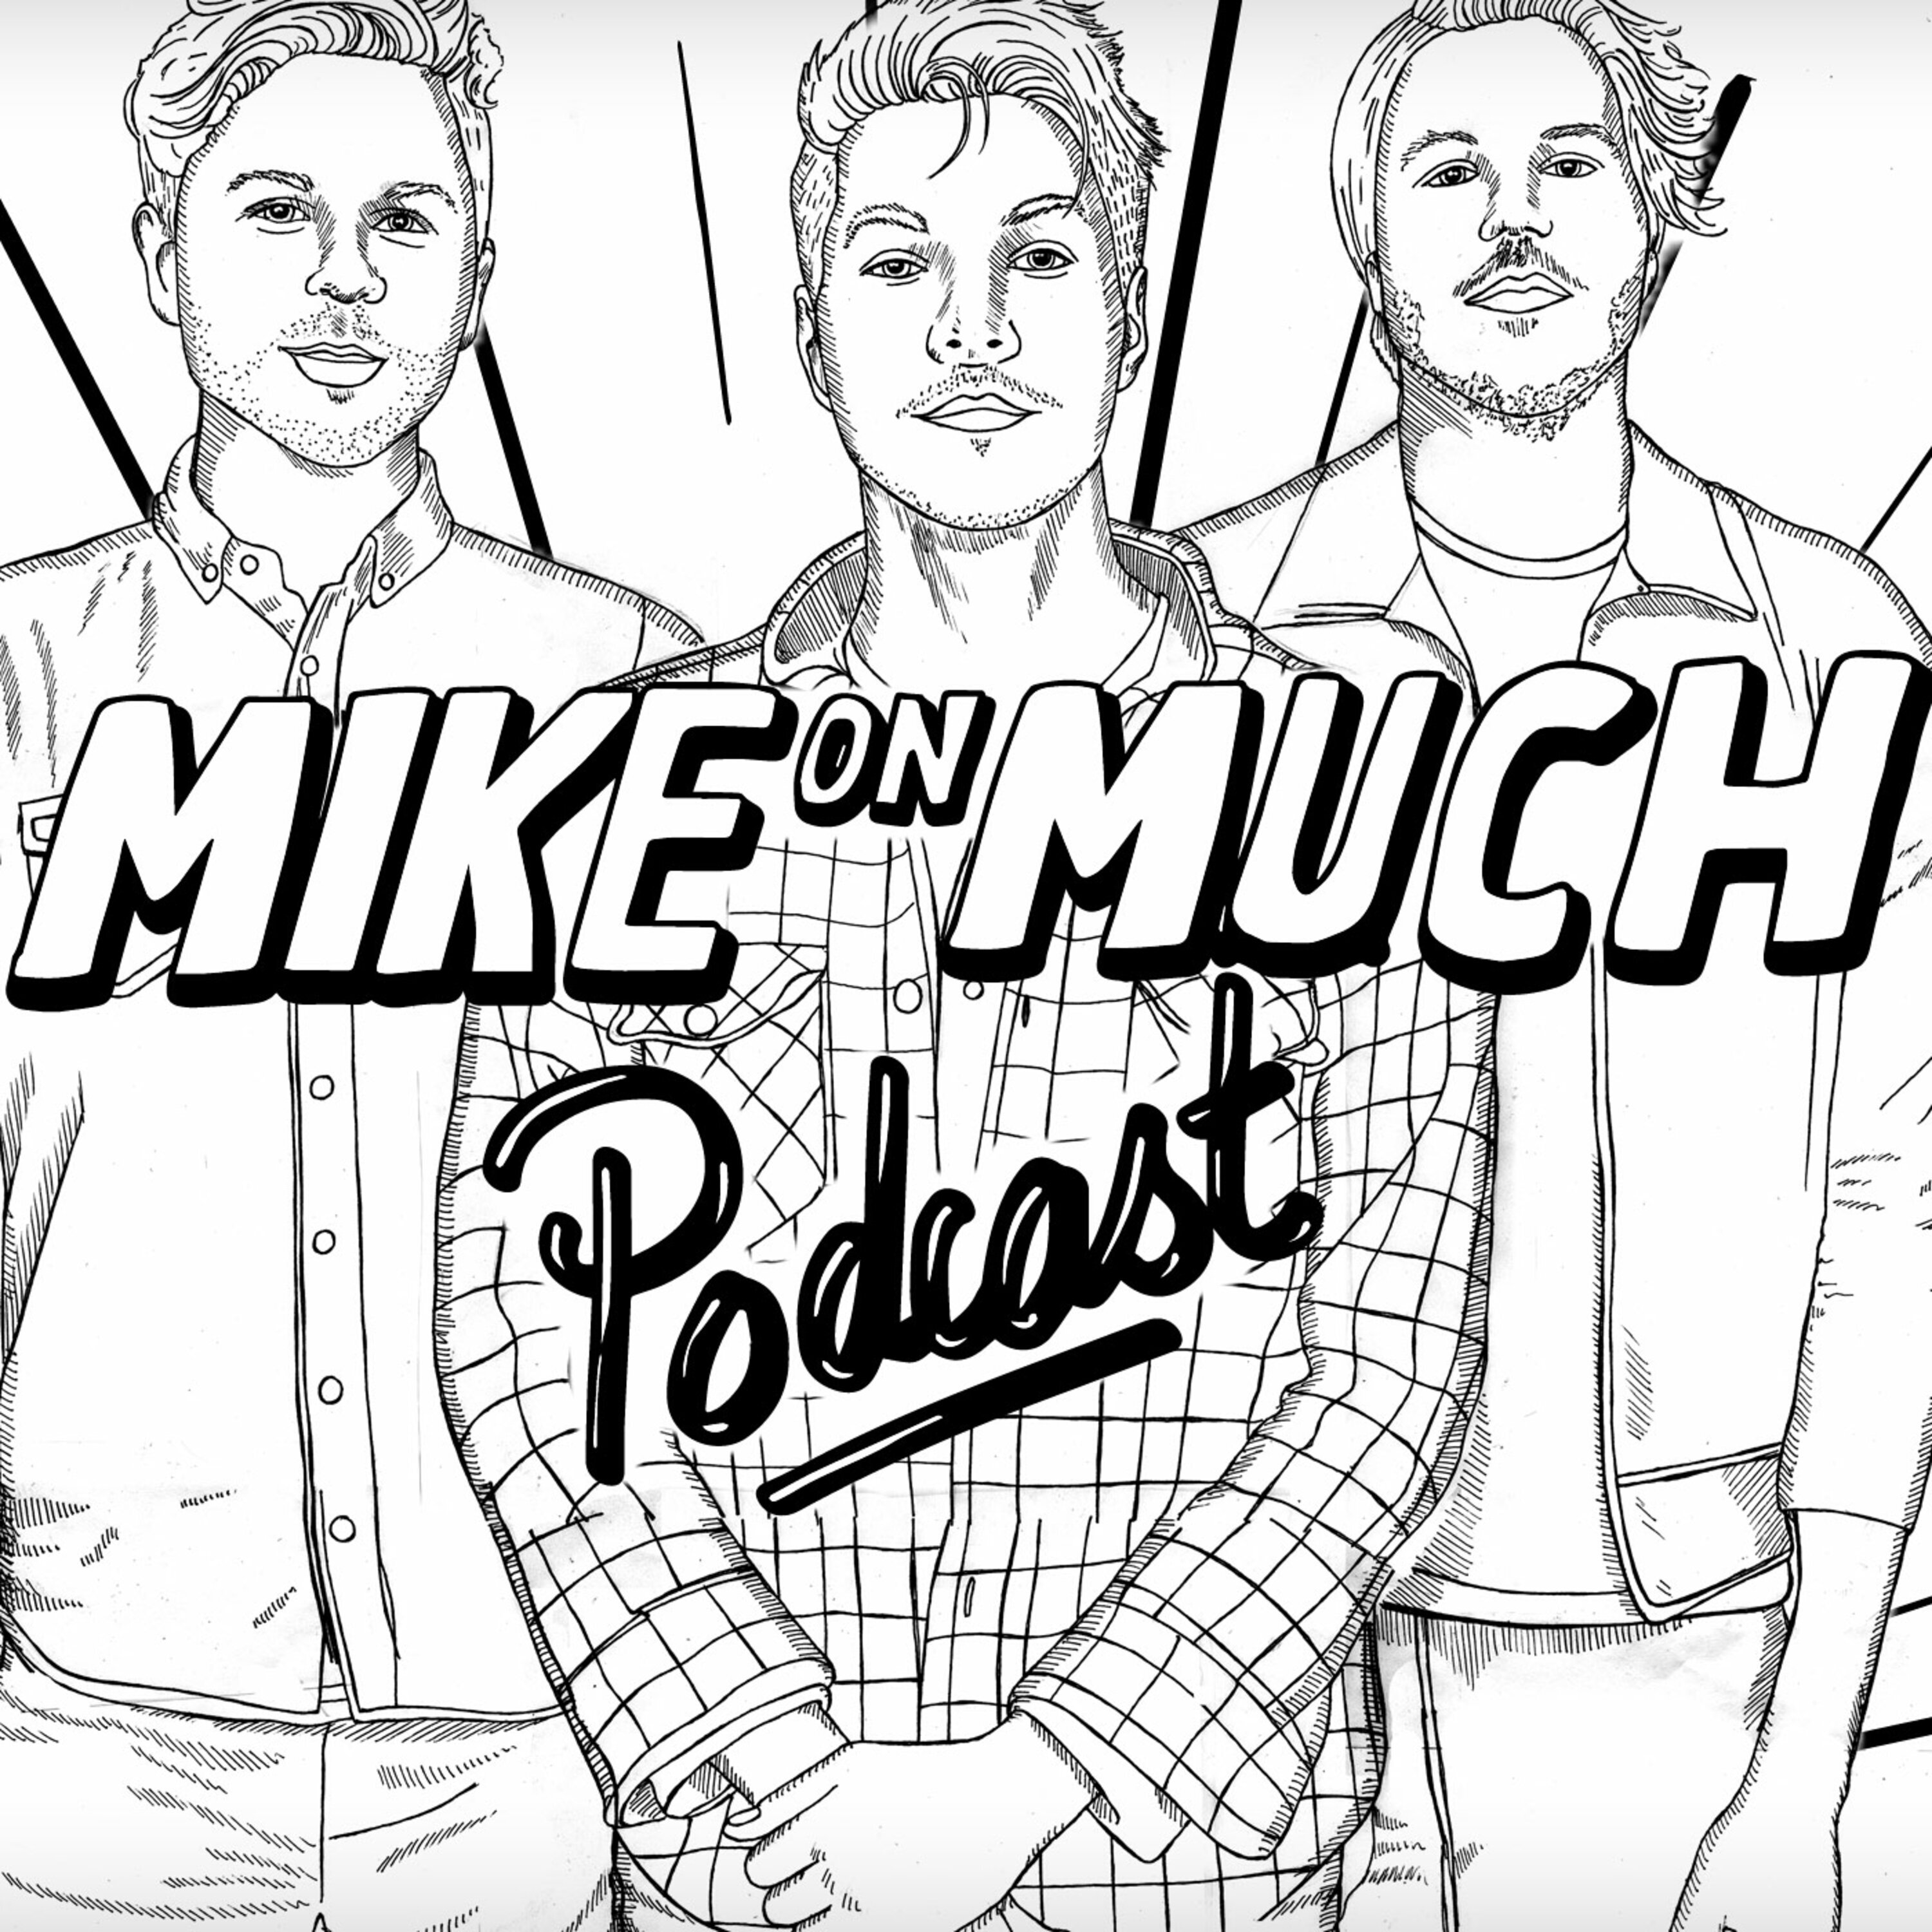 Season 1 Mike On Much: “You Would Lose Four Years Of Your Prime But You Would Come Back Very Famous”